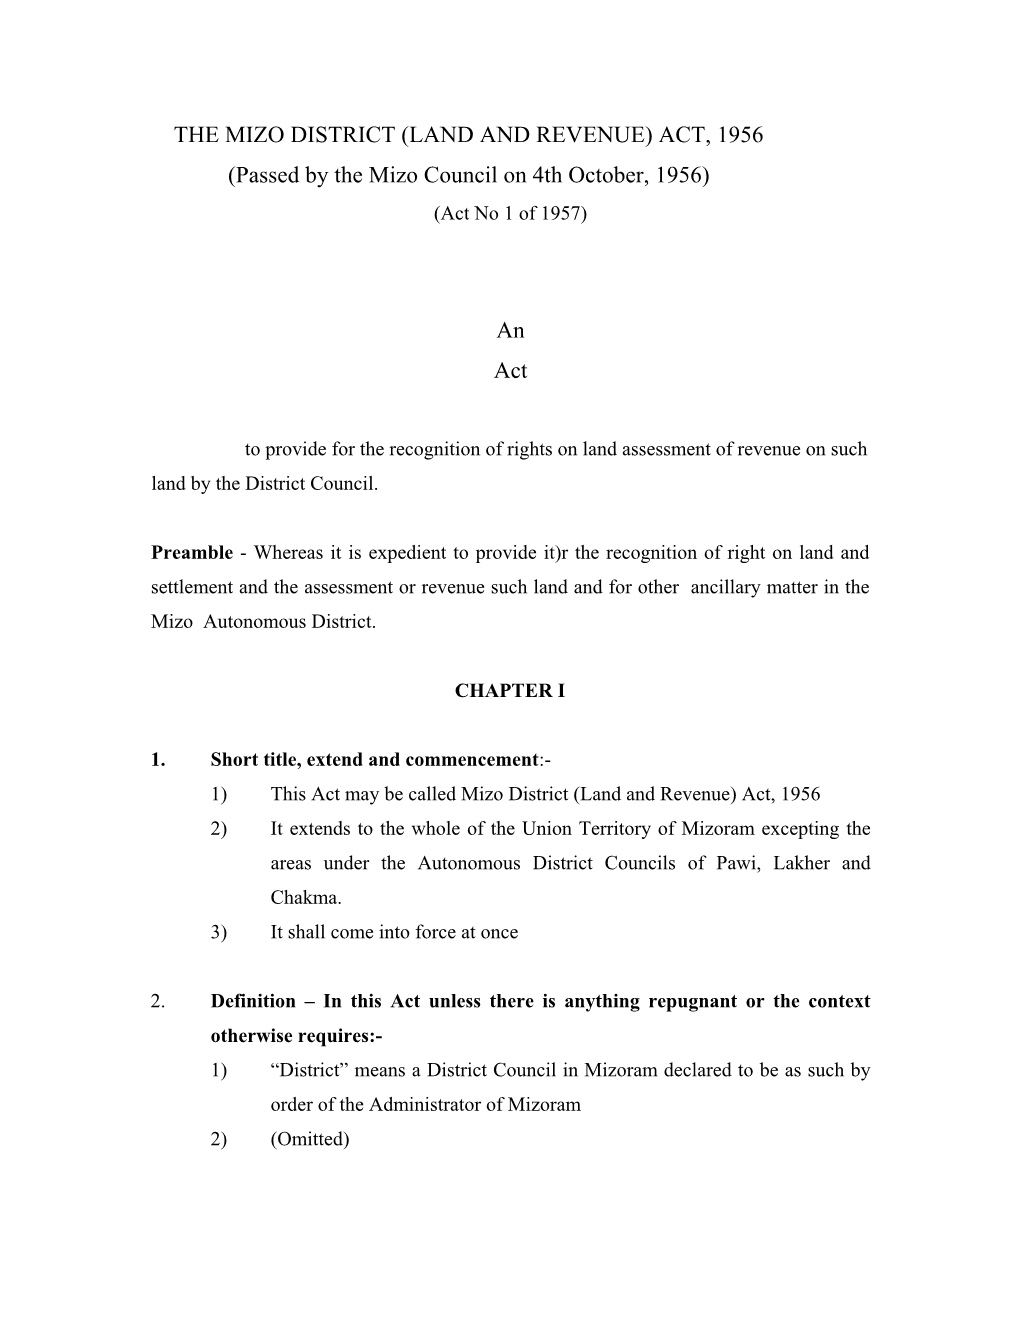 THE MIZO DISTRICT (LAND and REVENUE) ACT, 1956 (Passed by the Mizo Council on 4Th October, 1956) (Act No 1 of 1957)